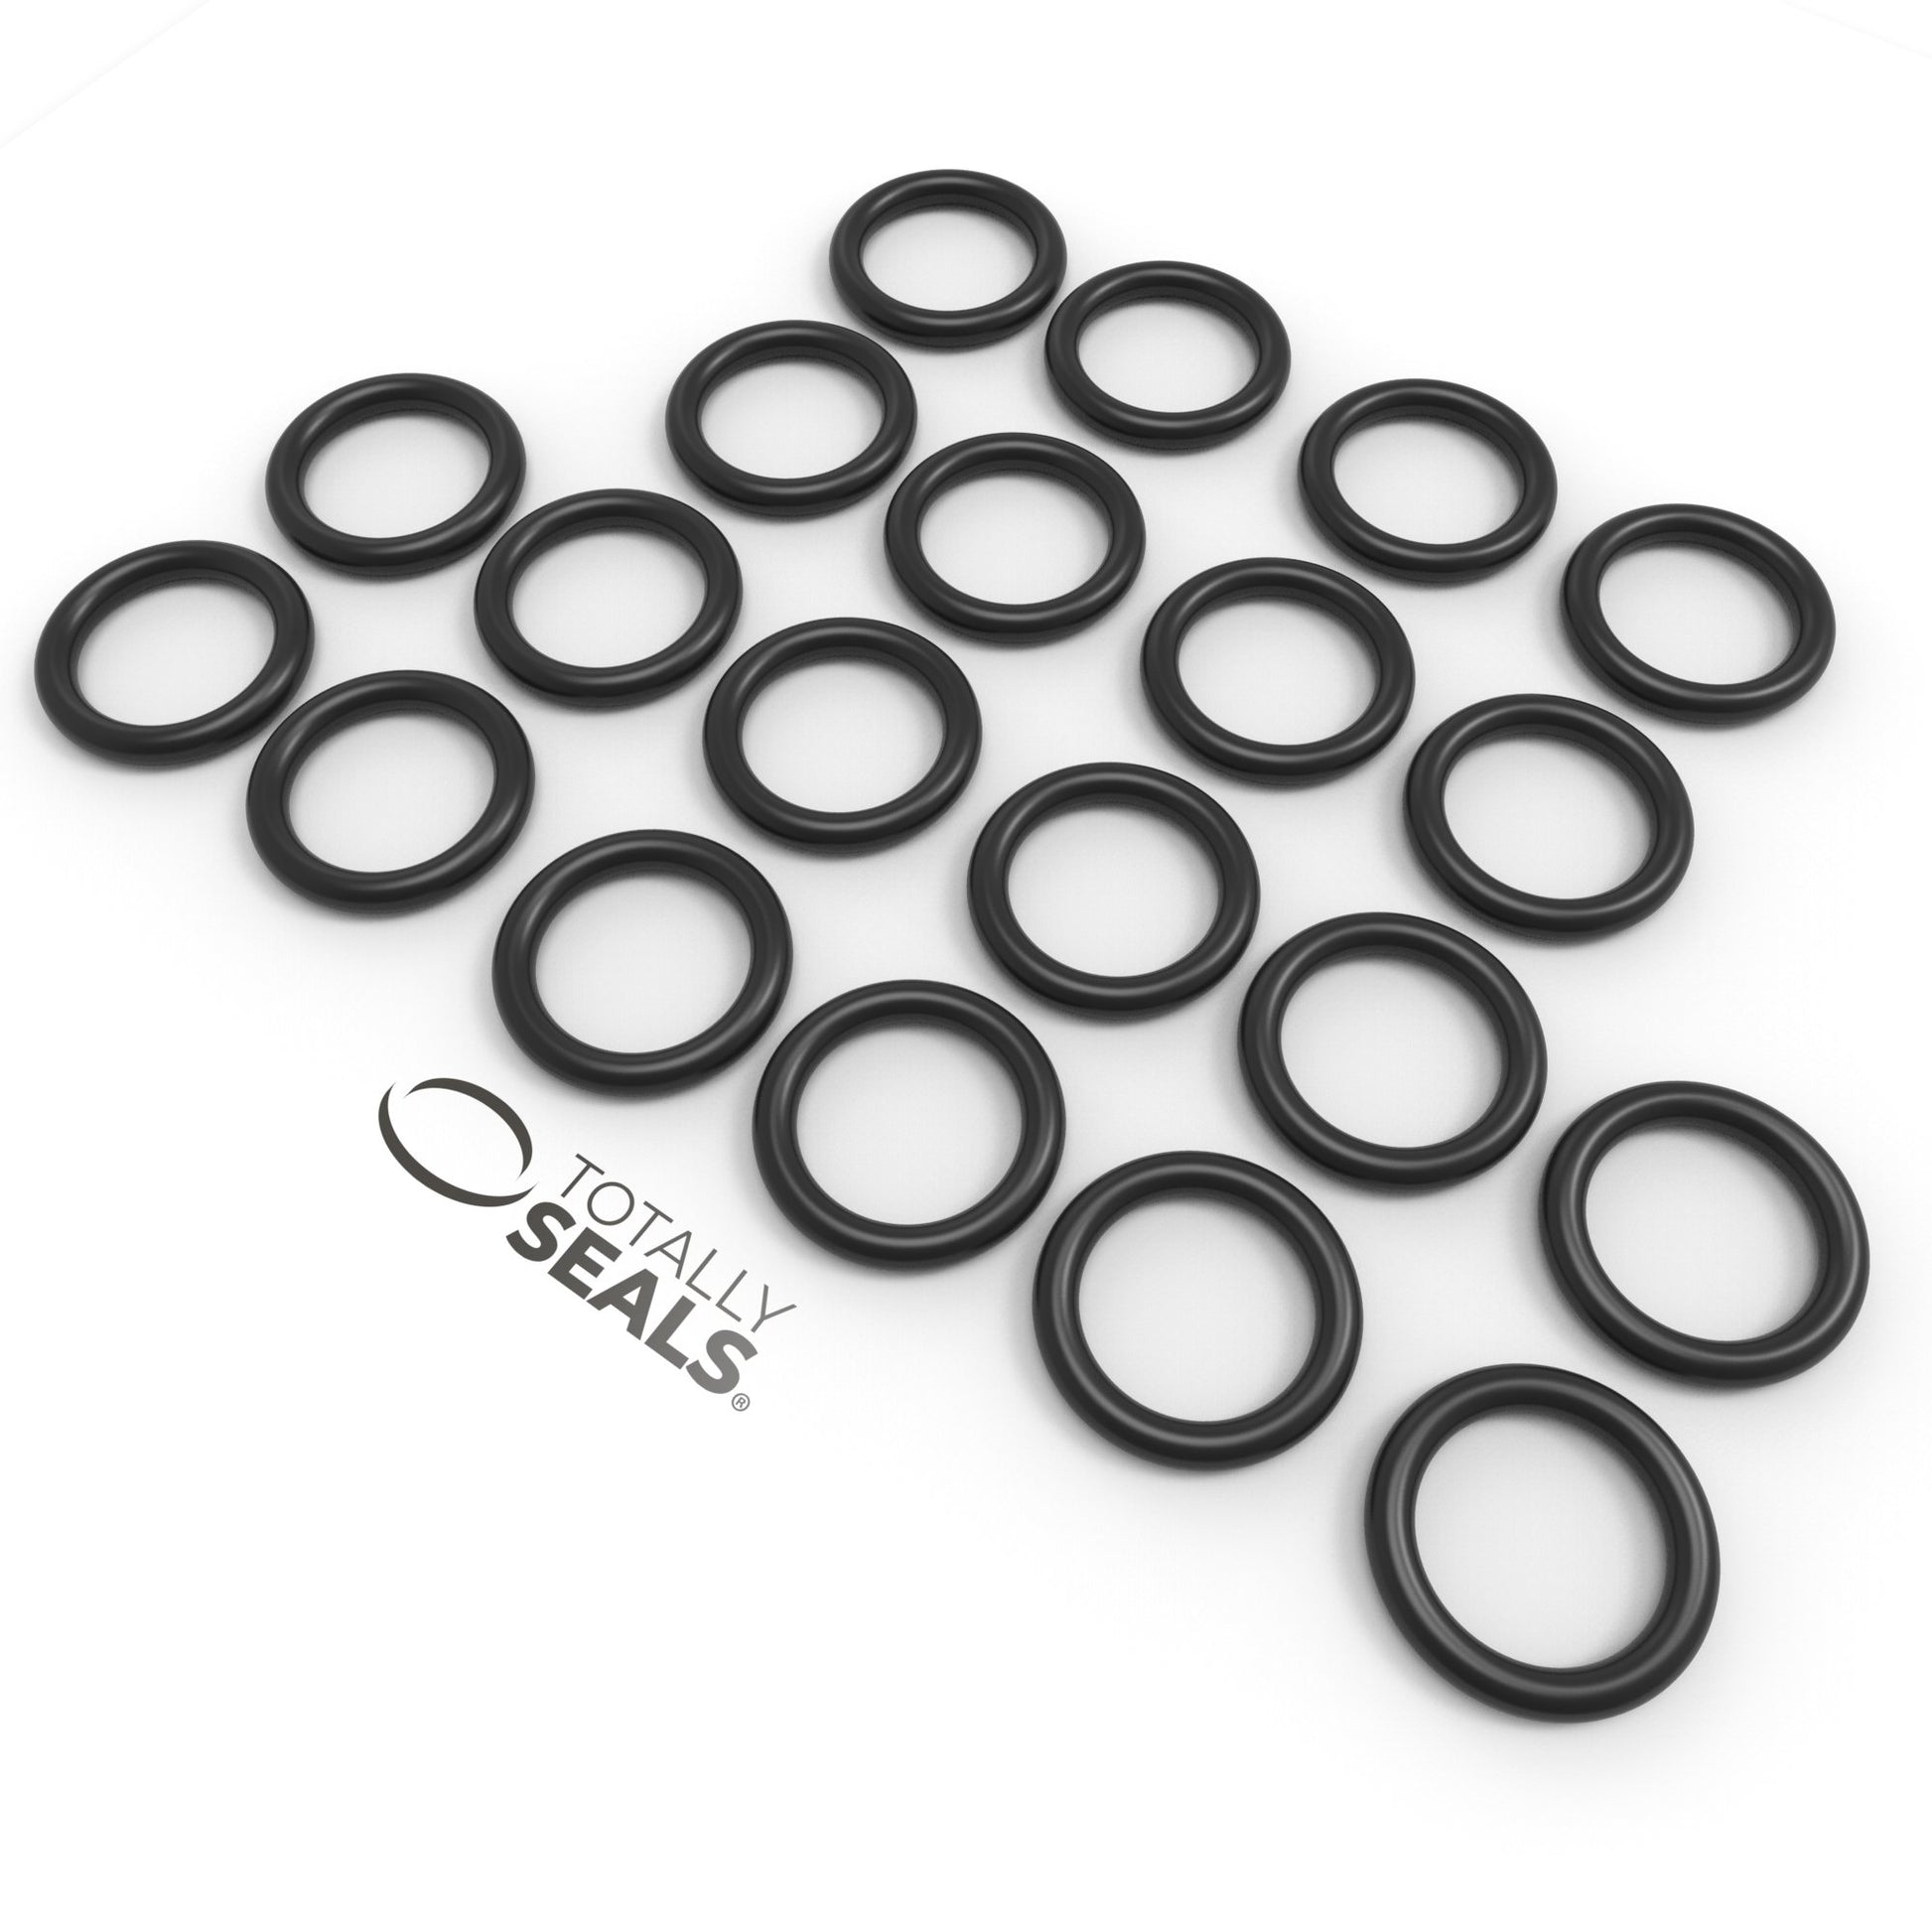 60mm x 3mm (66mm OD) Nitrile O-Rings - Totally Seals®